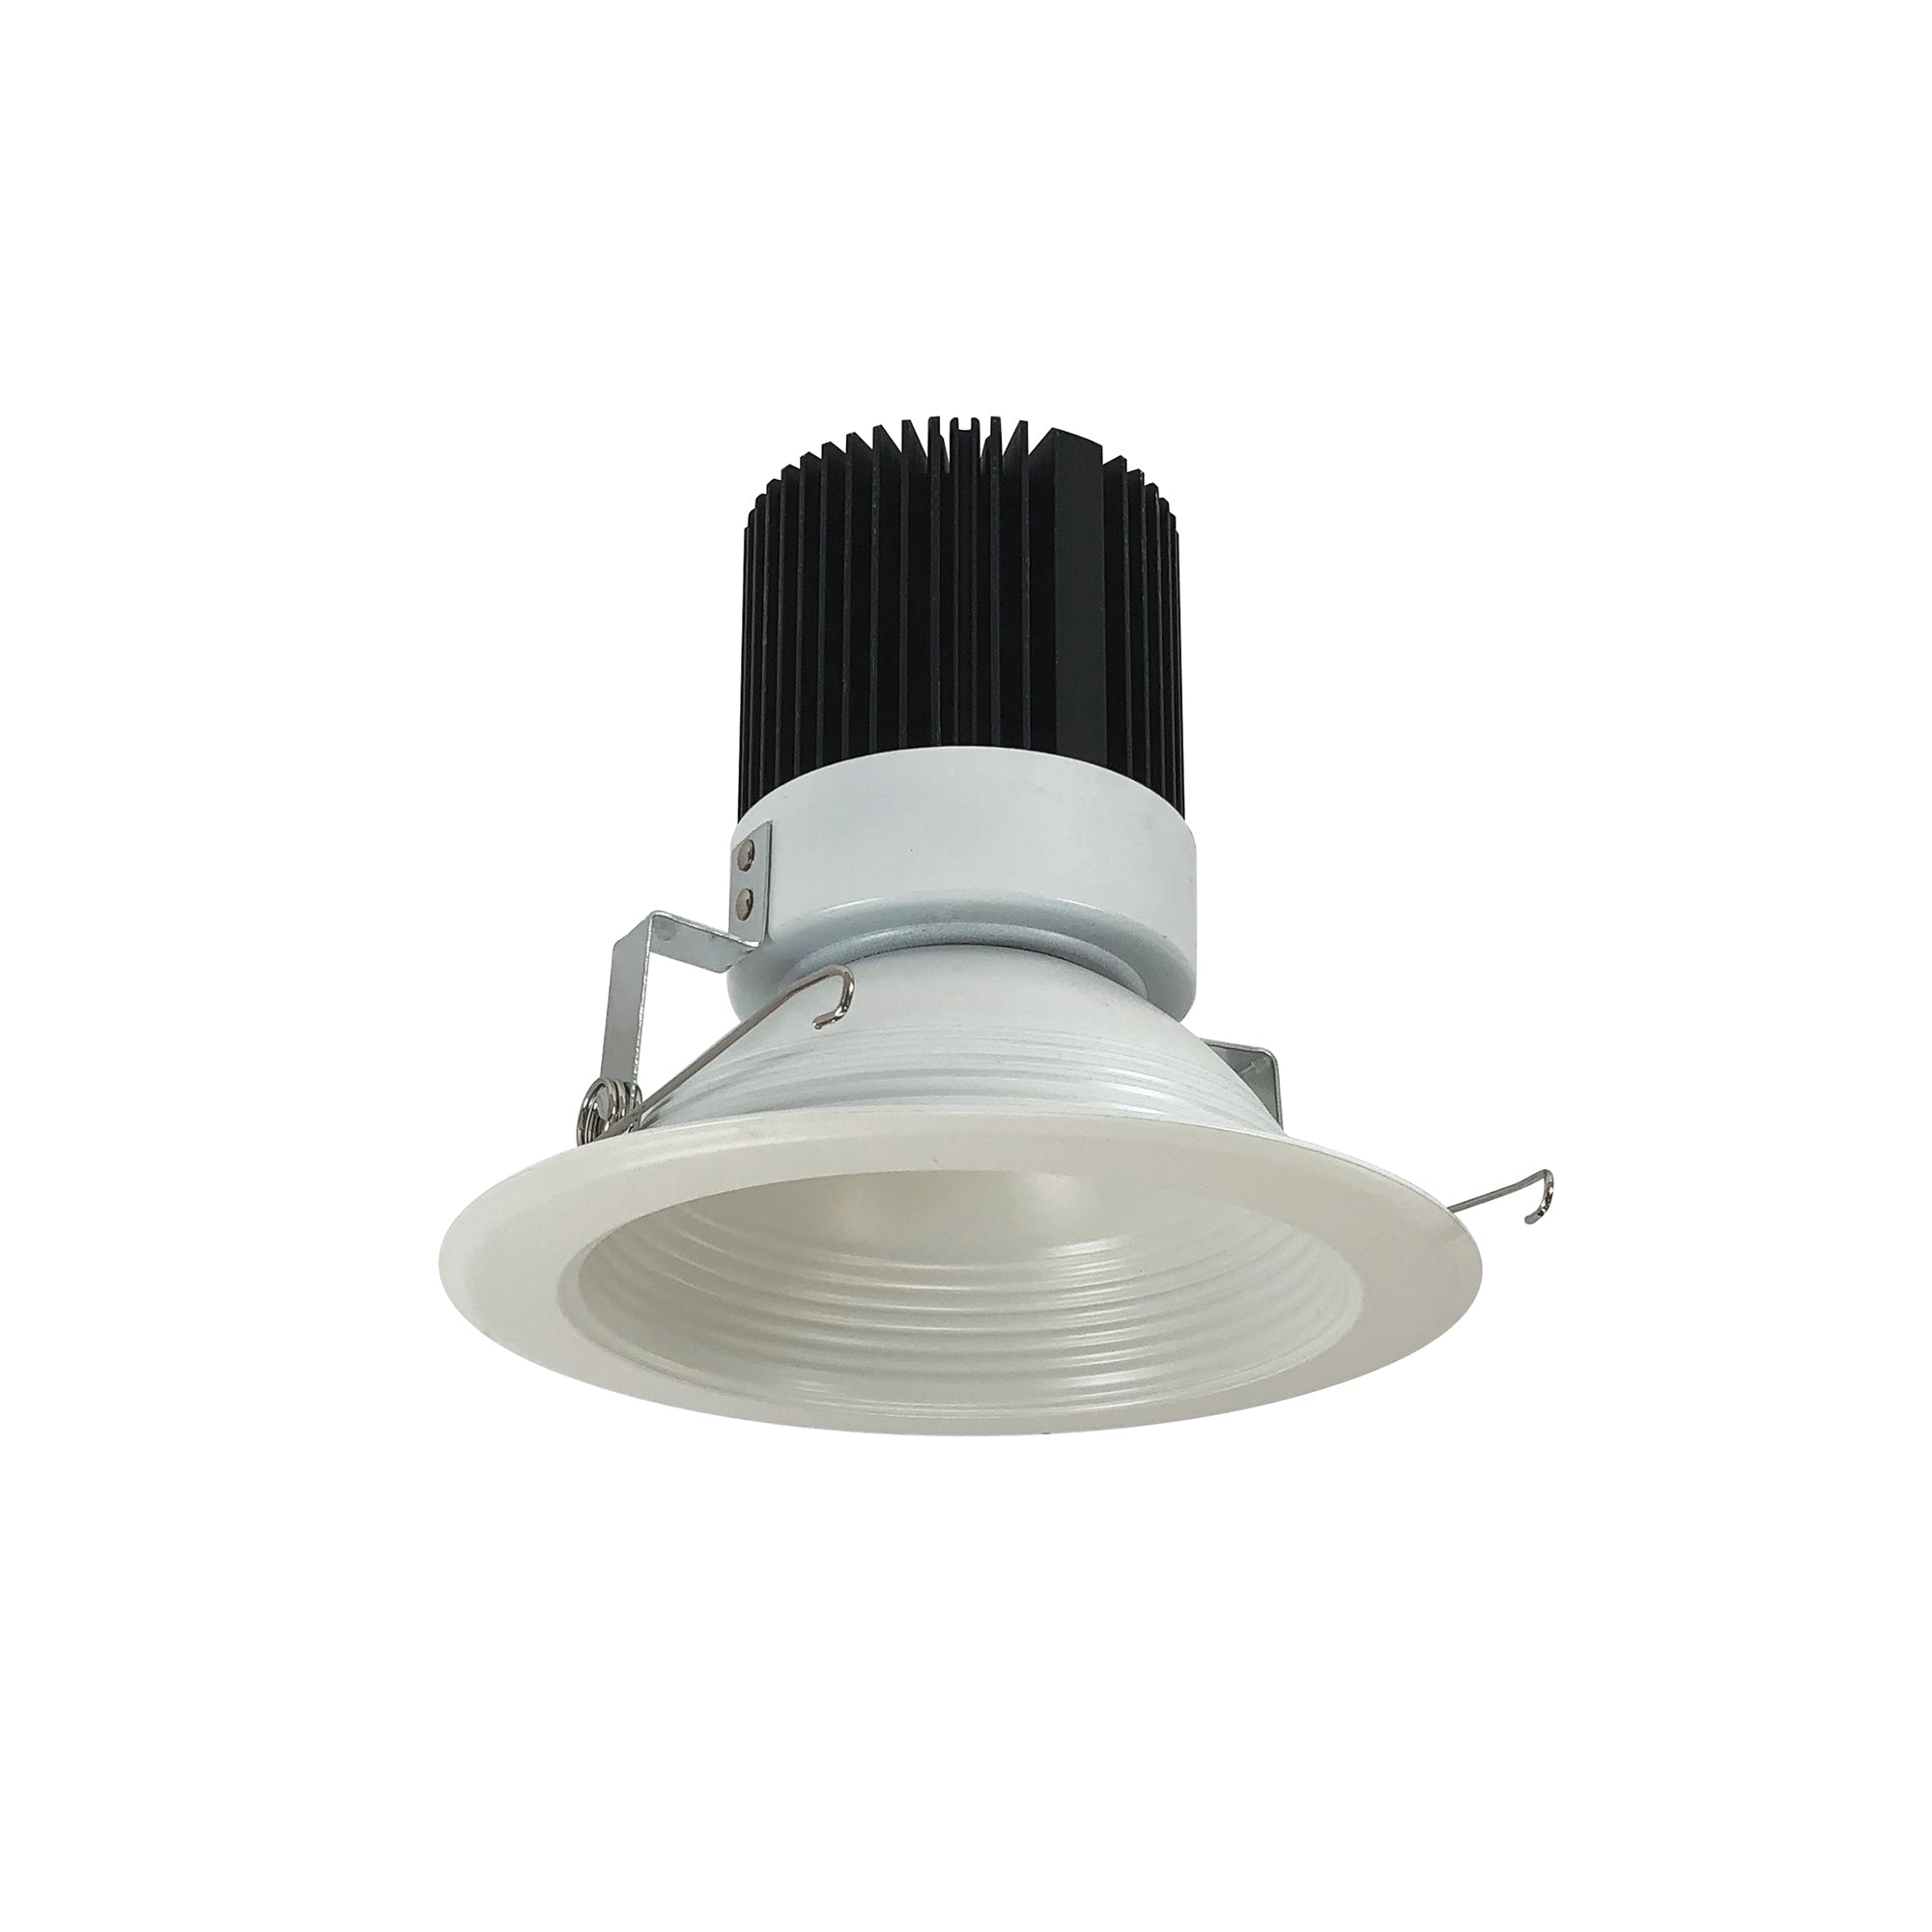 Nora Lighting NRM2-612L2530FMPW - Recessed - 6 Inch Marquise II Round Baffle, Flood, 2500lm, 3000K, Matte Powder White (Available with Non-IC Housings Only)